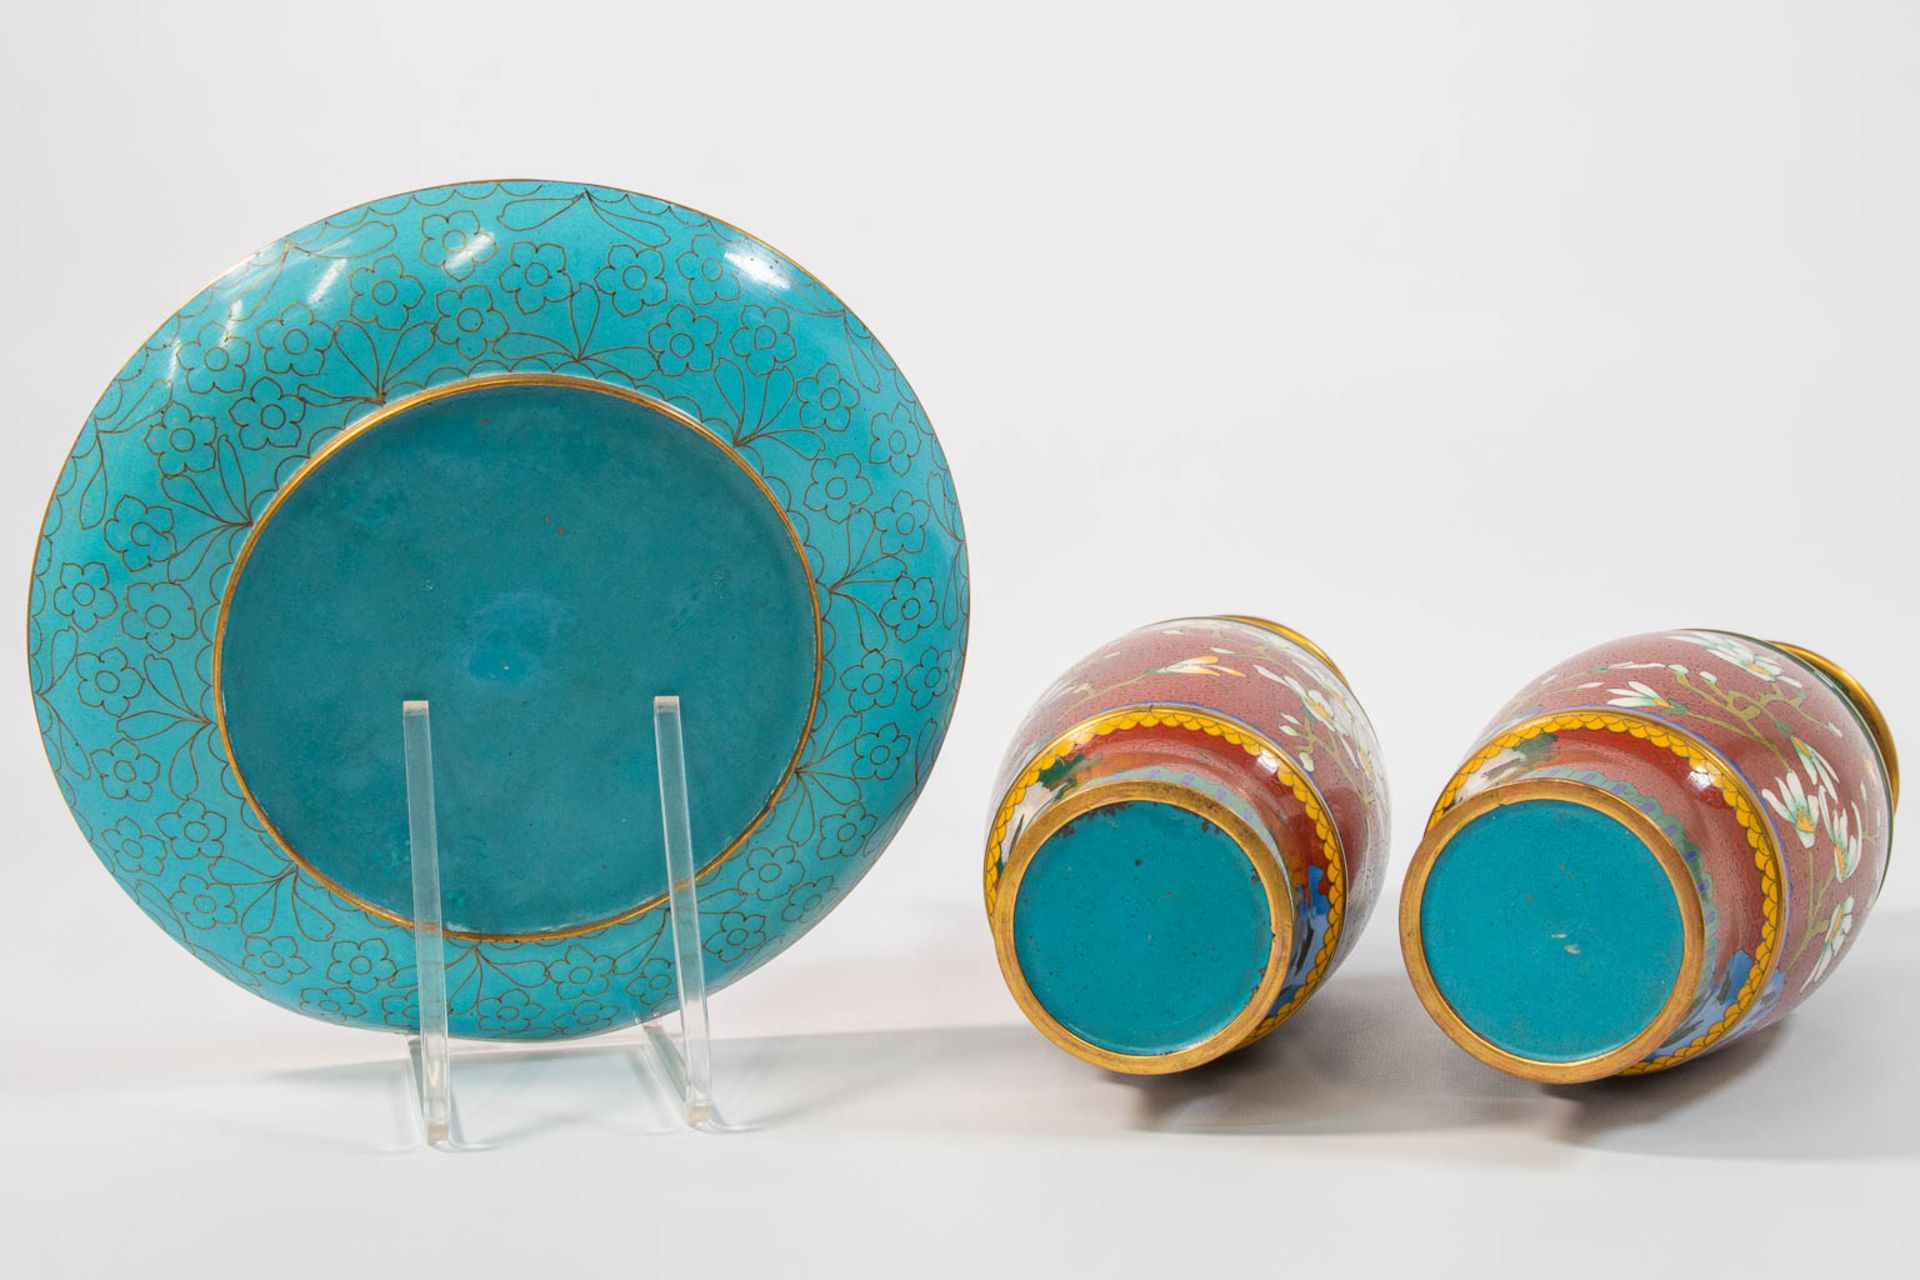 A pair of cloisonné vases and display plate on wood stands. Made of bronze and enamel. - Image 6 of 10